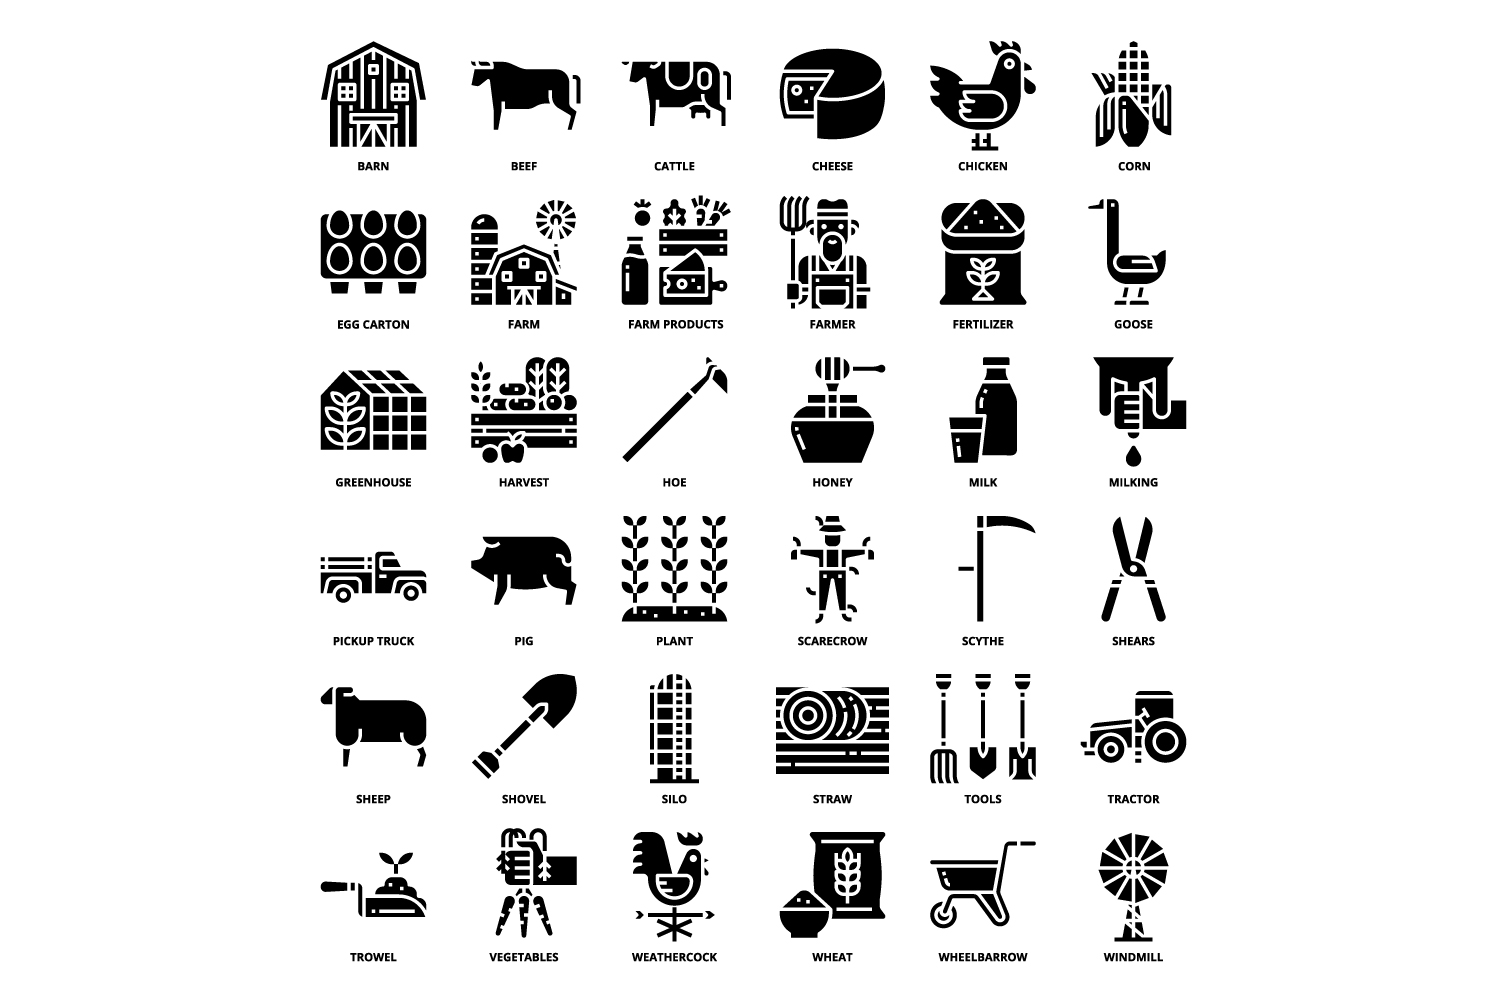 Black and white image of farm icons.